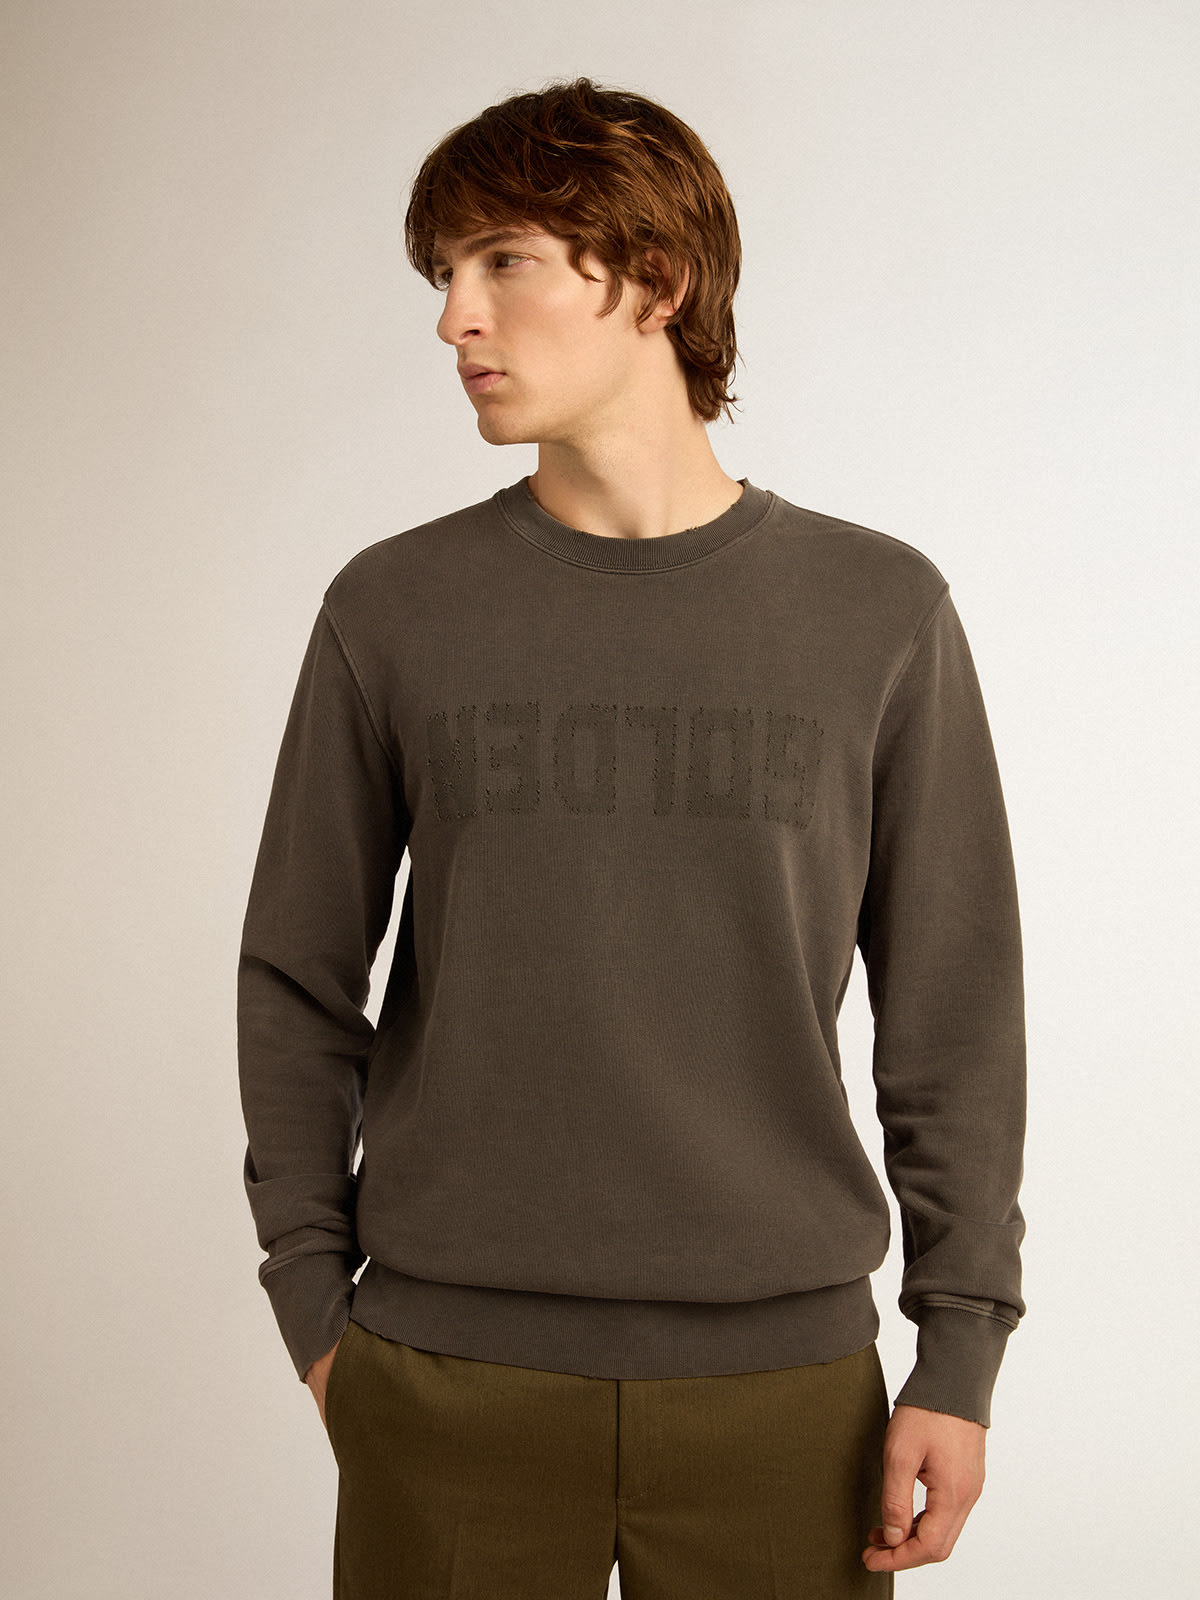 Golden Goose - Golden Collection sweatshirt with logo in anthracite gray with a distressed treatment in 